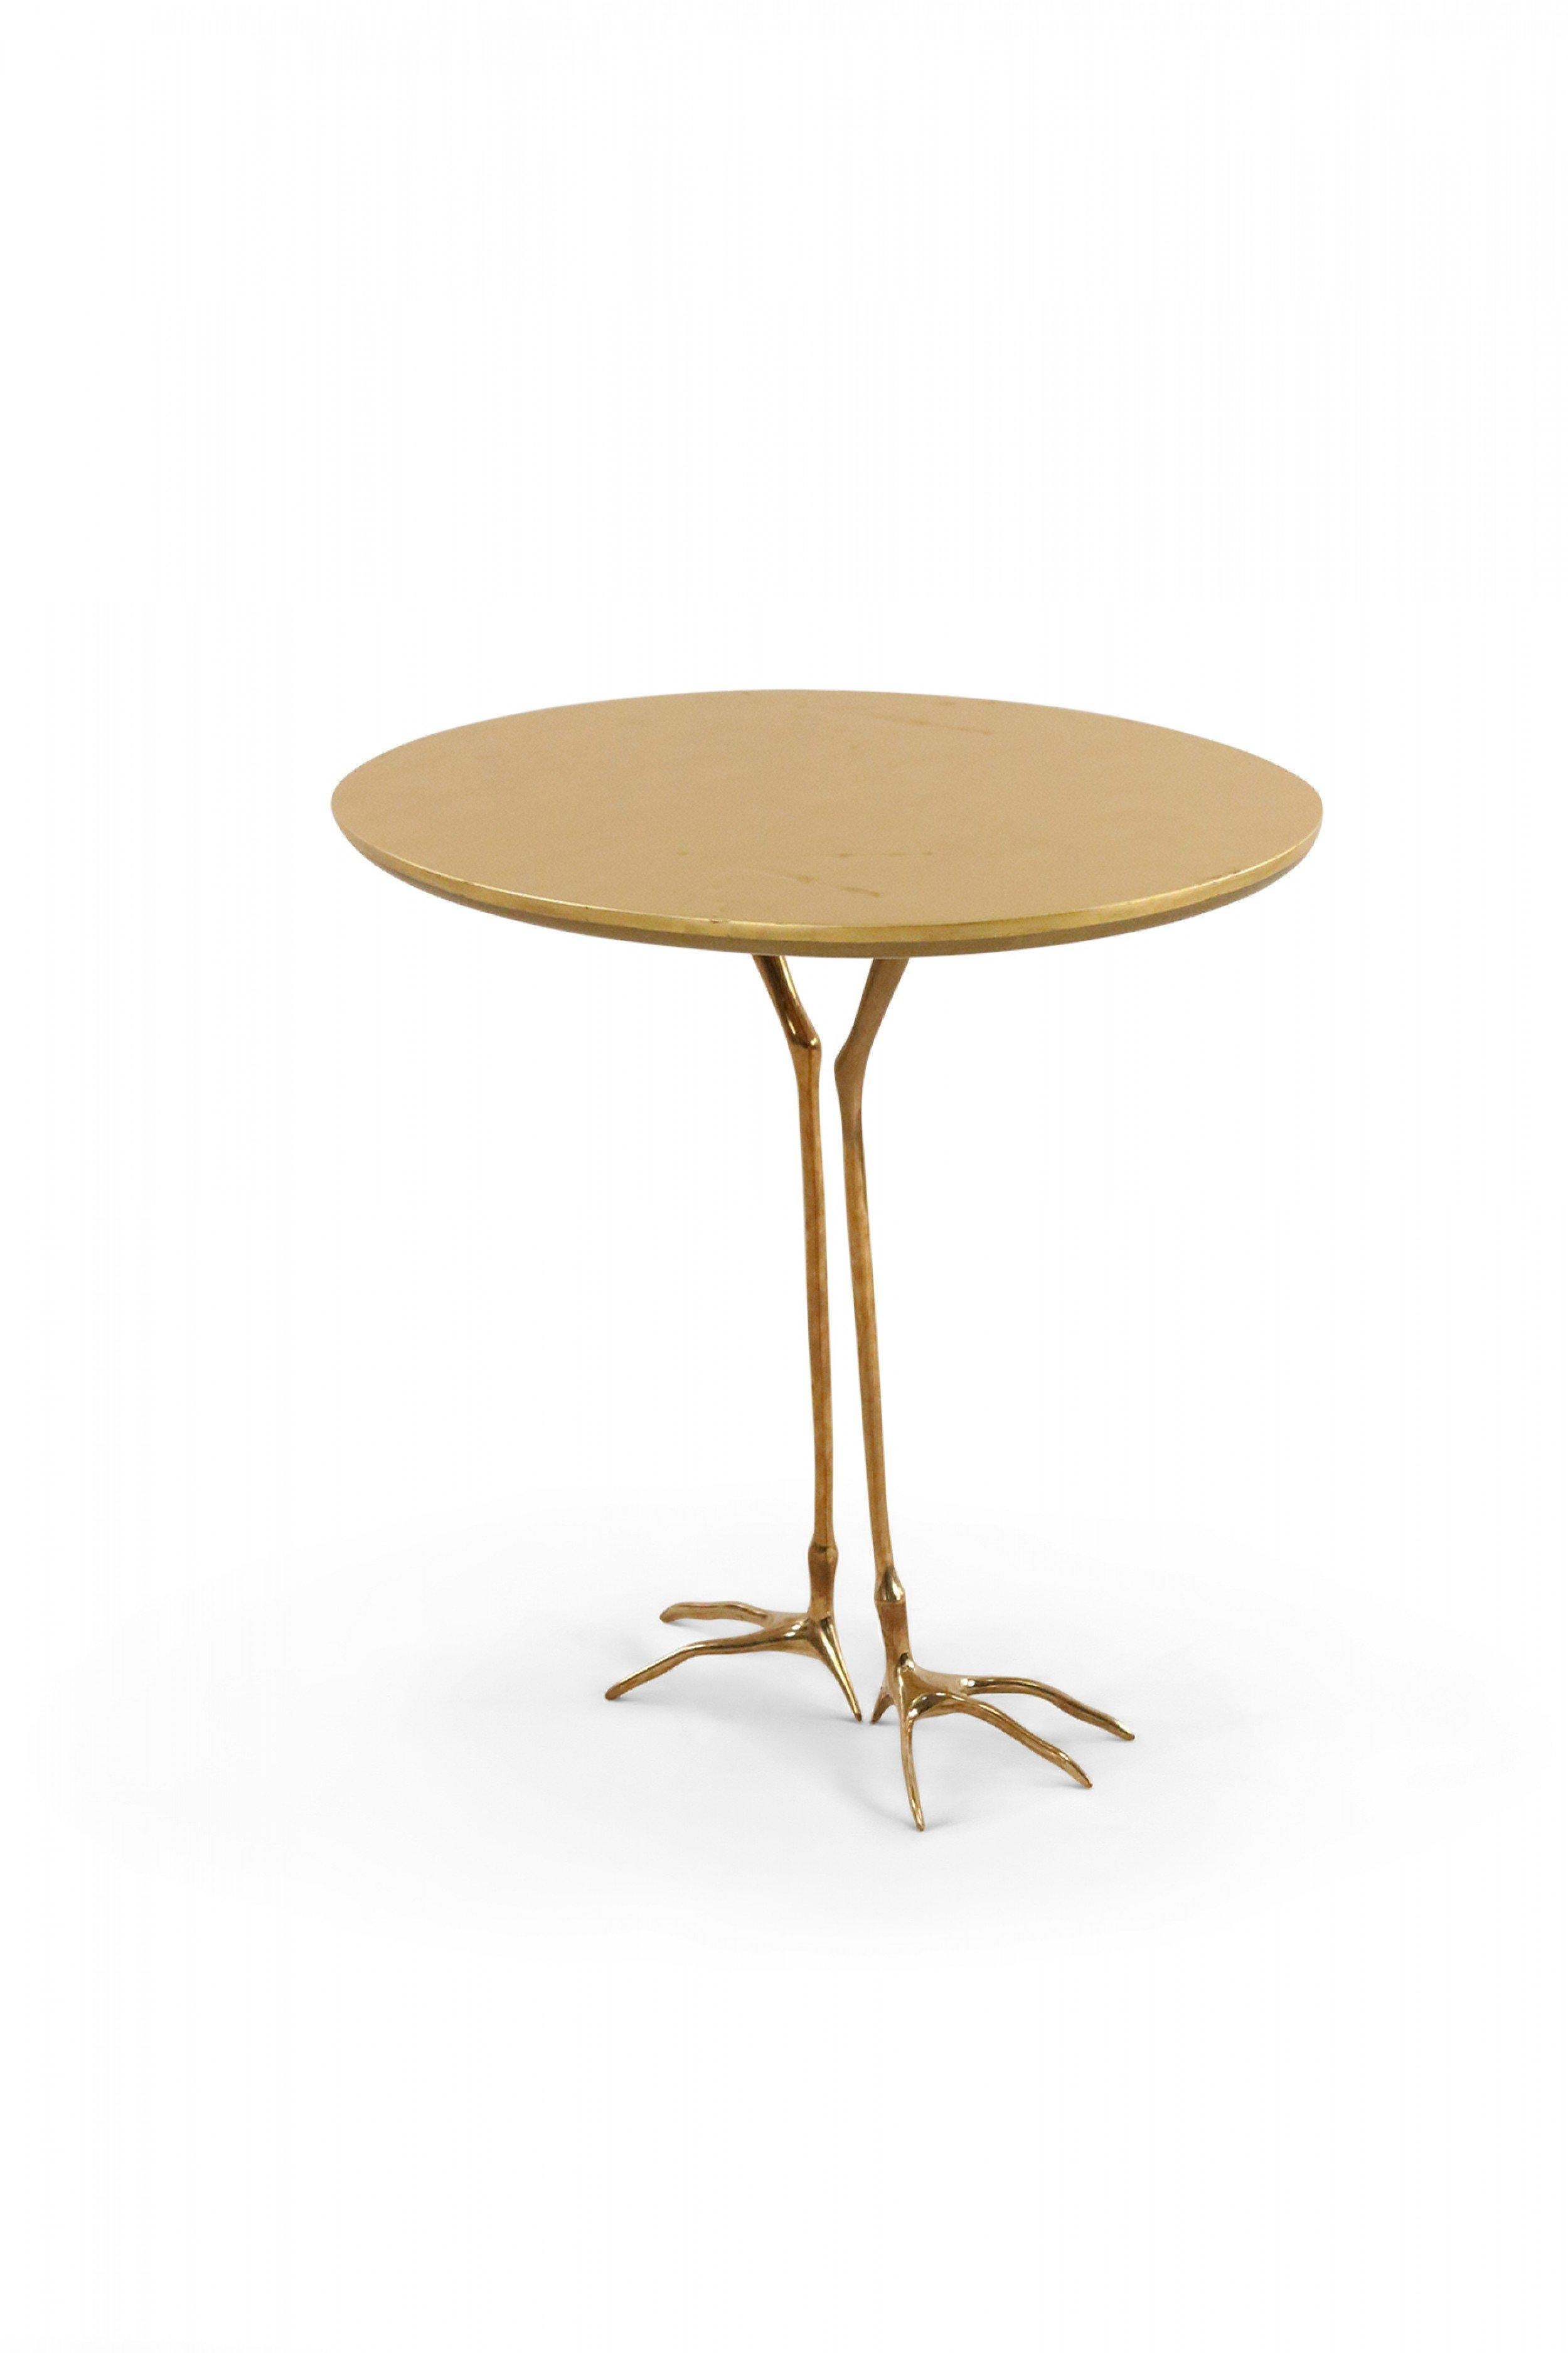 Meret Oppenheim Mid-Century Gilt Metal Bird Foot End Table In Good Condition For Sale In New York, NY